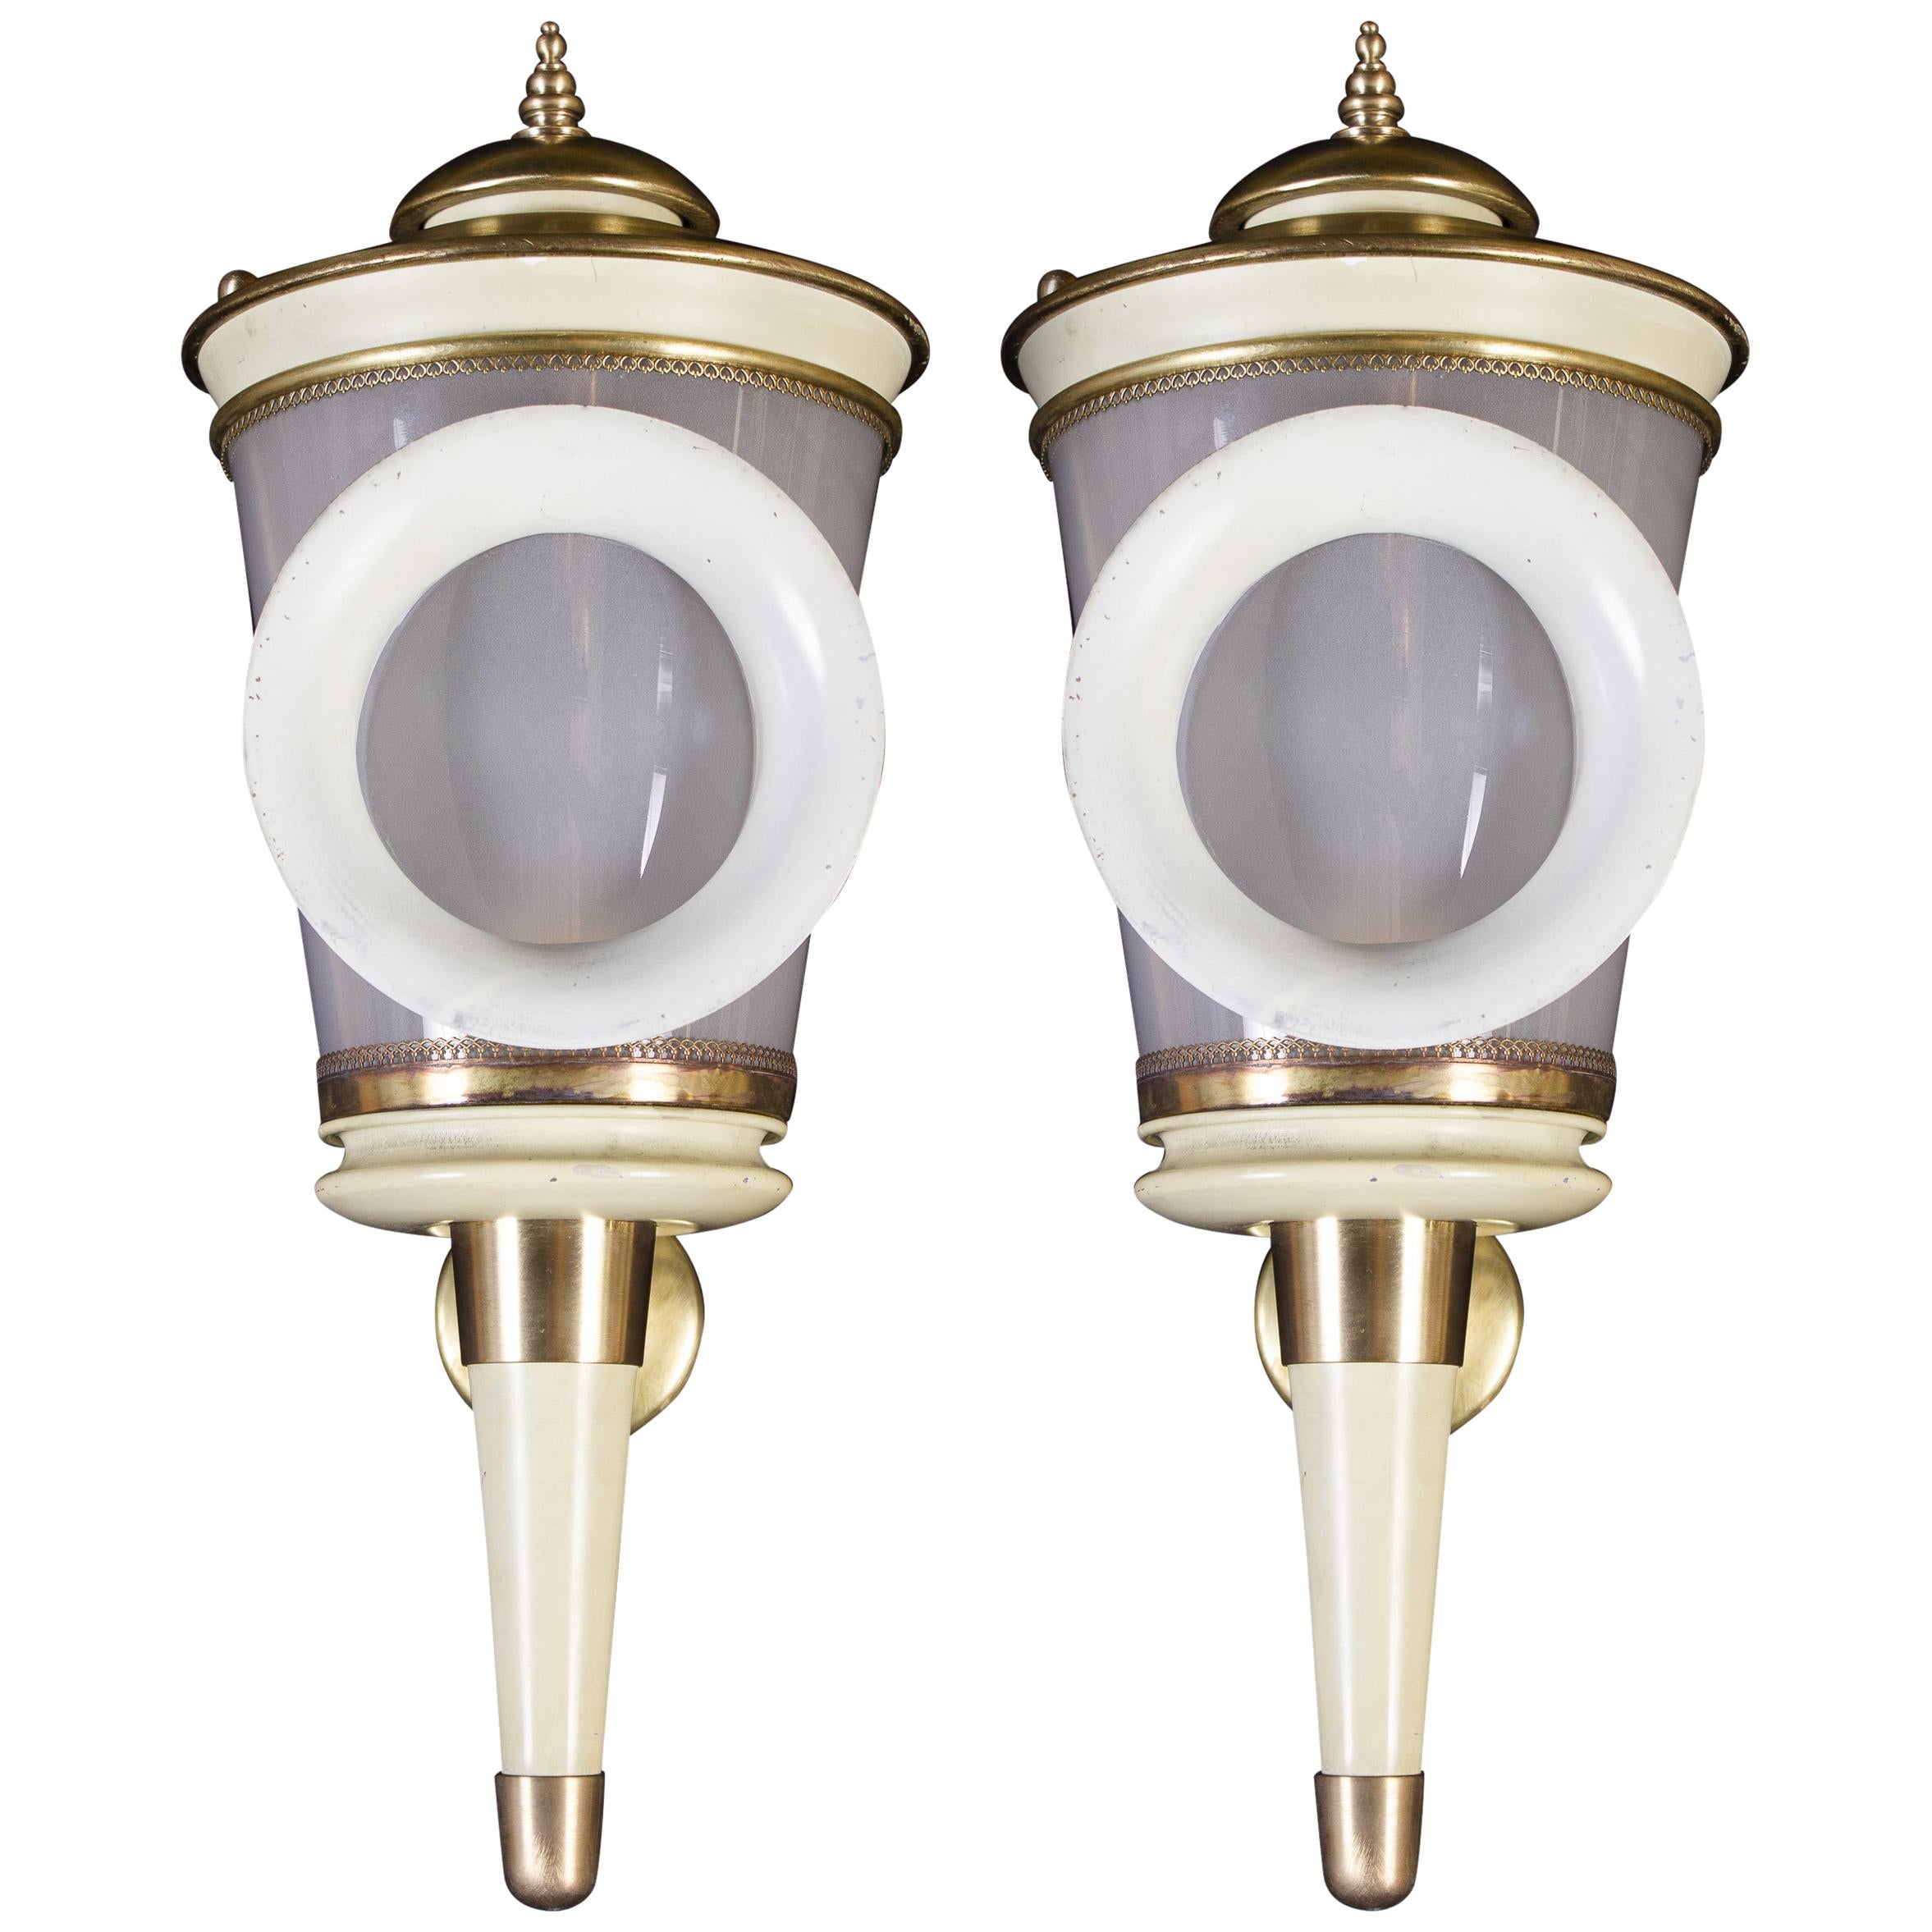 Pair of Ivory Painted and Brass Sconces or Wall Lights Carlo Scarpa Style, 1940